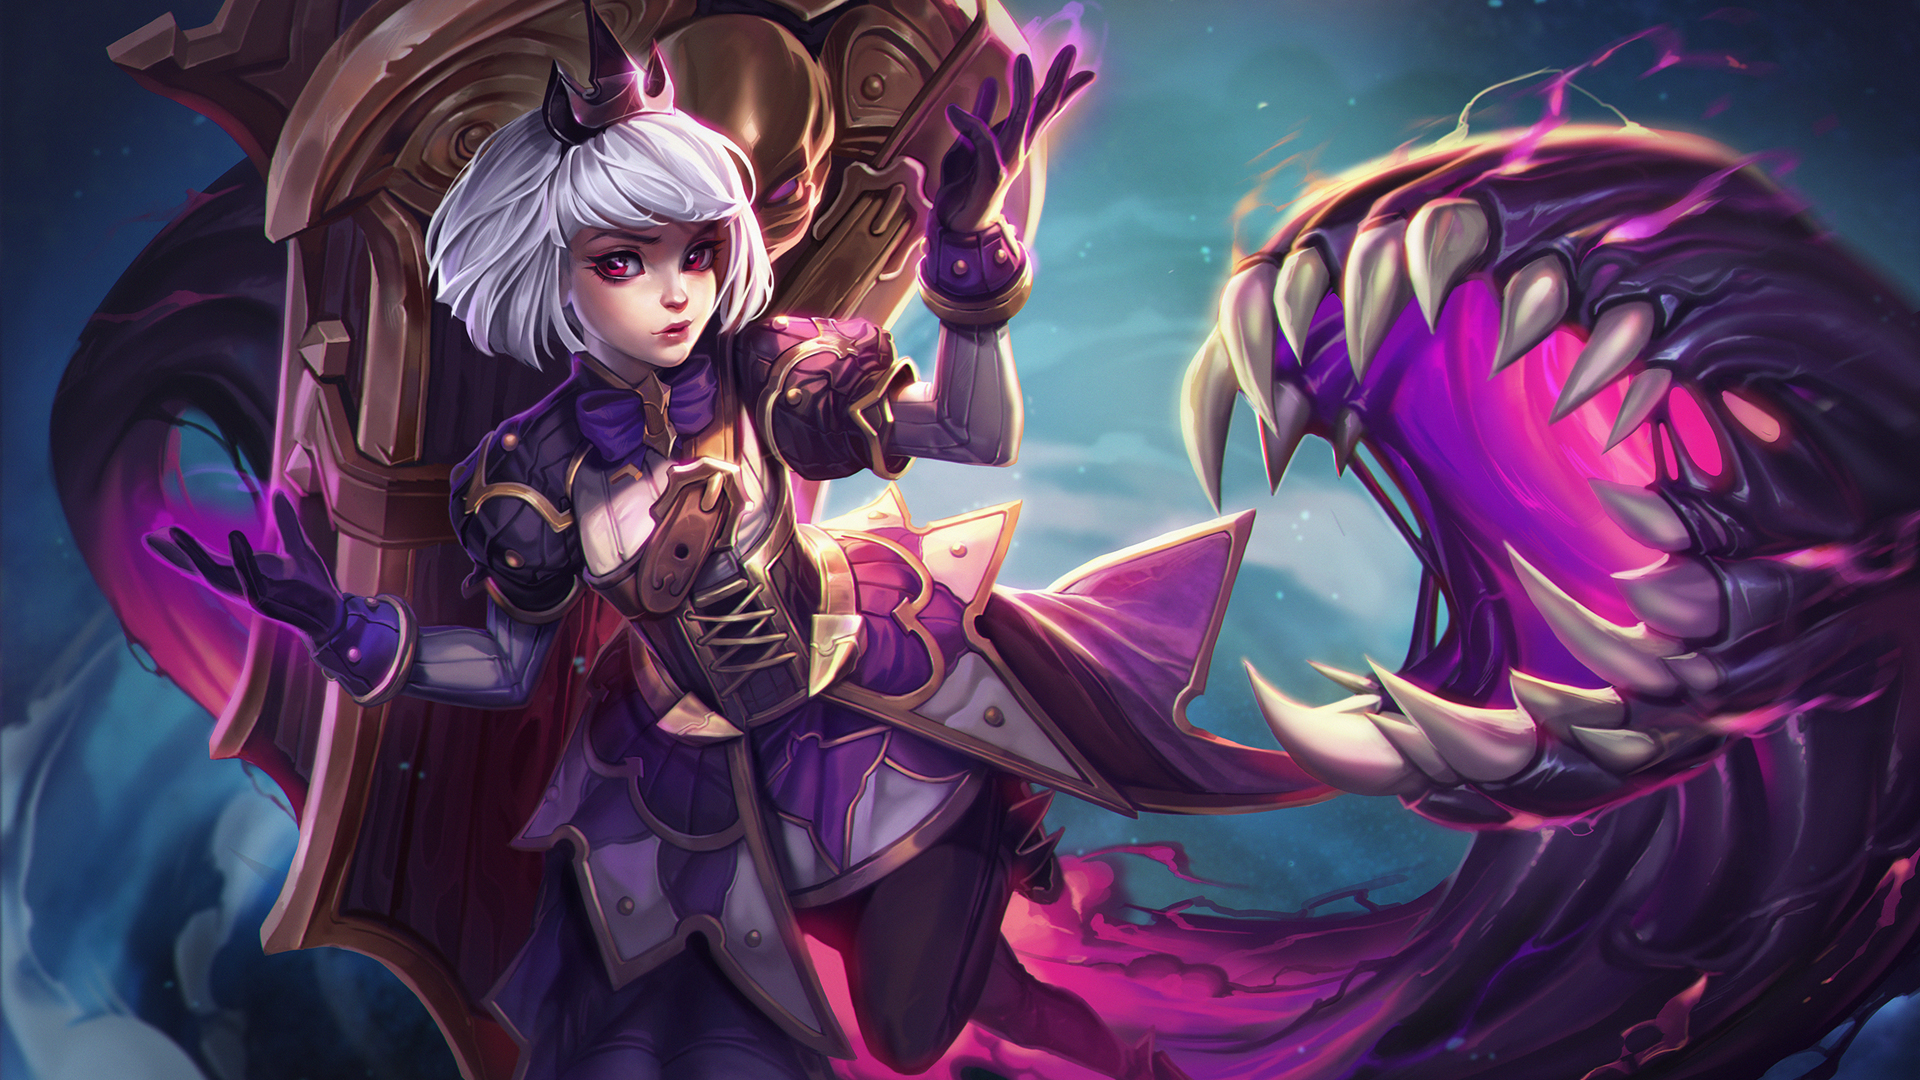 General 1920x1080 digital art artwork Blizzard Entertainment Heroes of the Storm white hair short hair red eyes looking at viewer video games anime girls Orphea